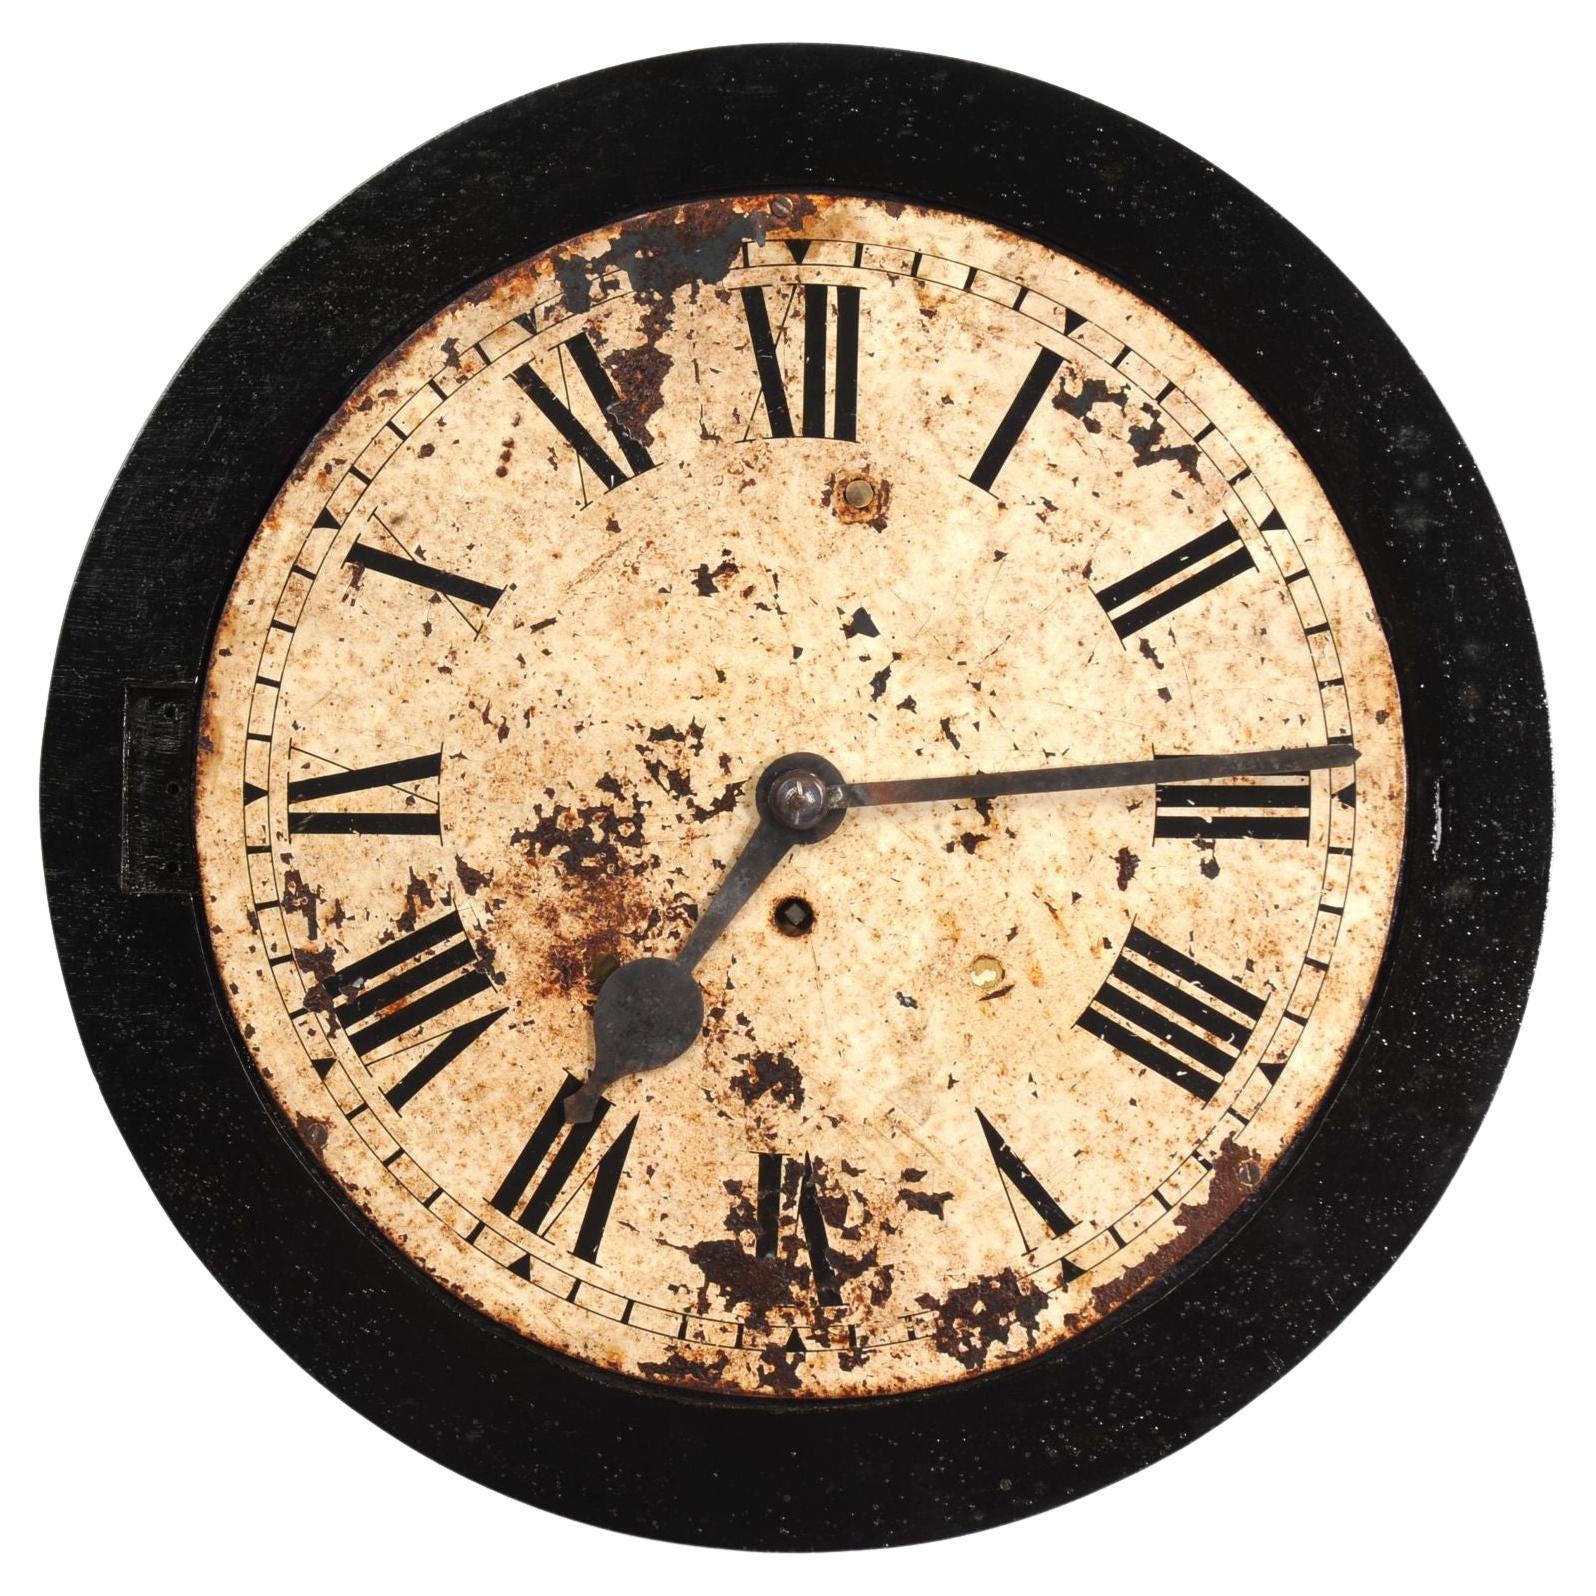 Antique 1920s Public Iron Wall Clock With Hand-Painted Dial, Industrial ...